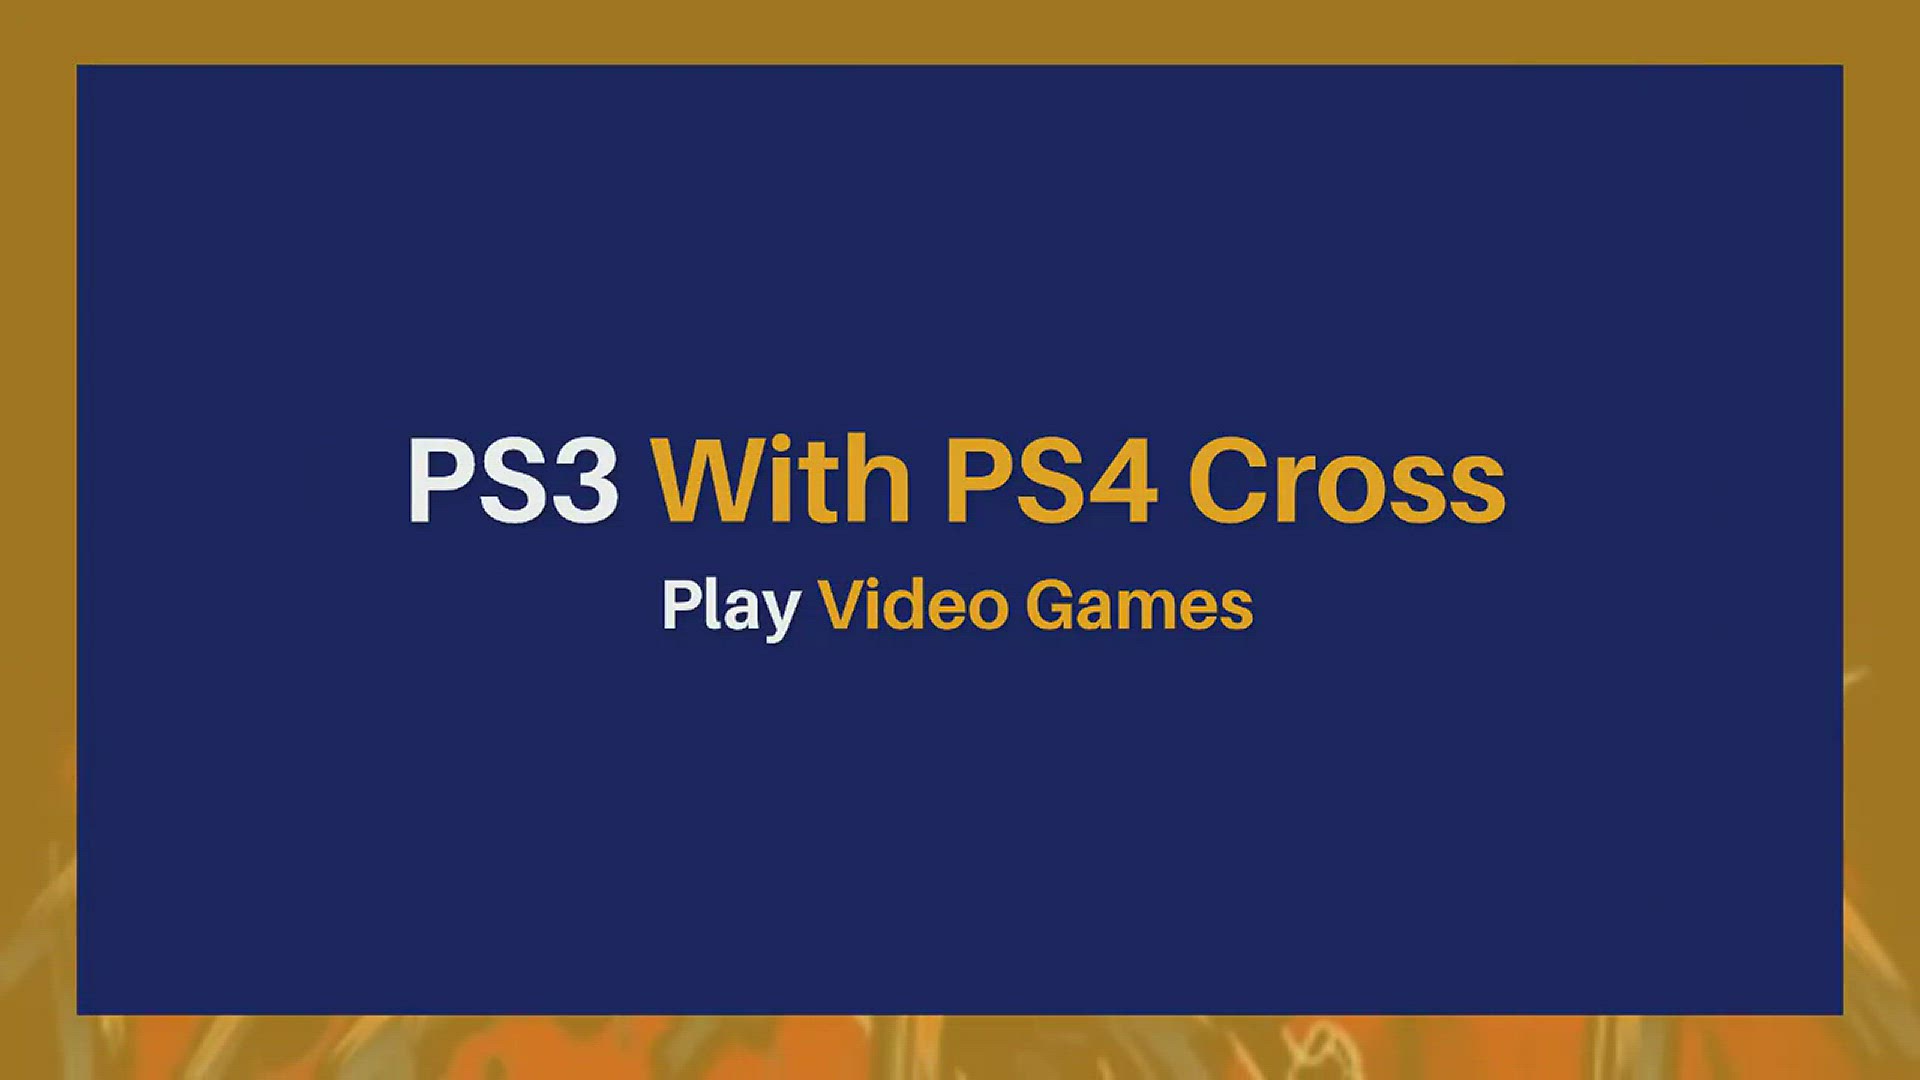 'Video thumbnail for PS3 With PS4 Cross Play Video Games'